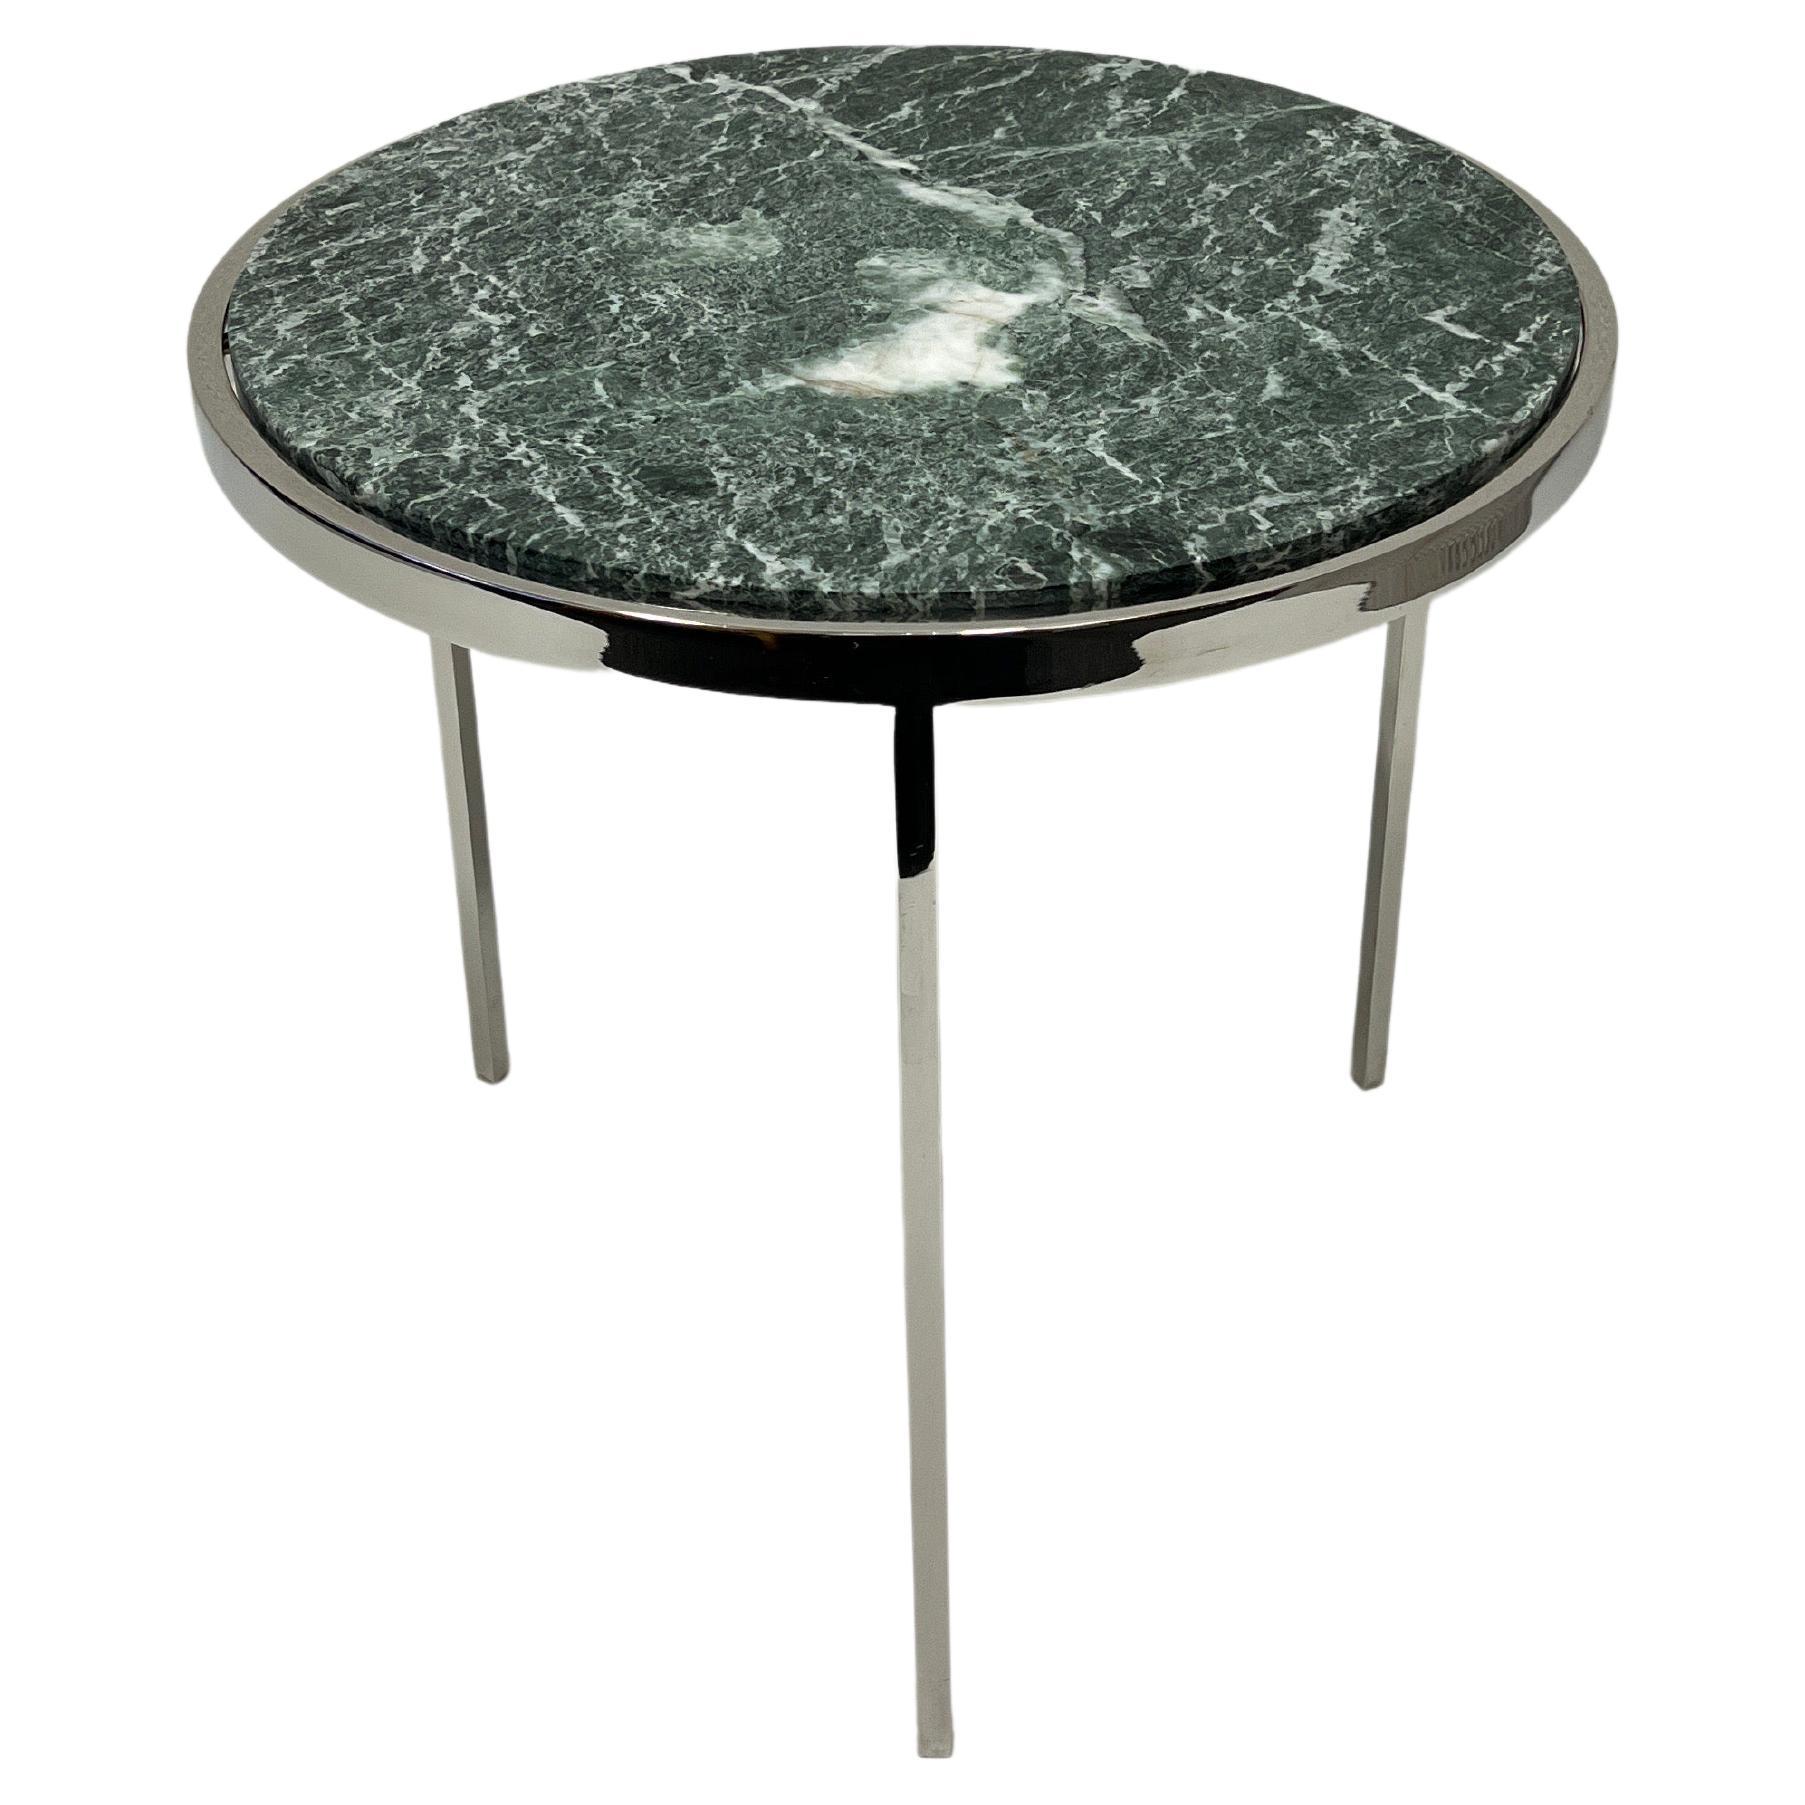 Green Marble and Polished Stainless Steel Round Tripod Side Table by Brueton 